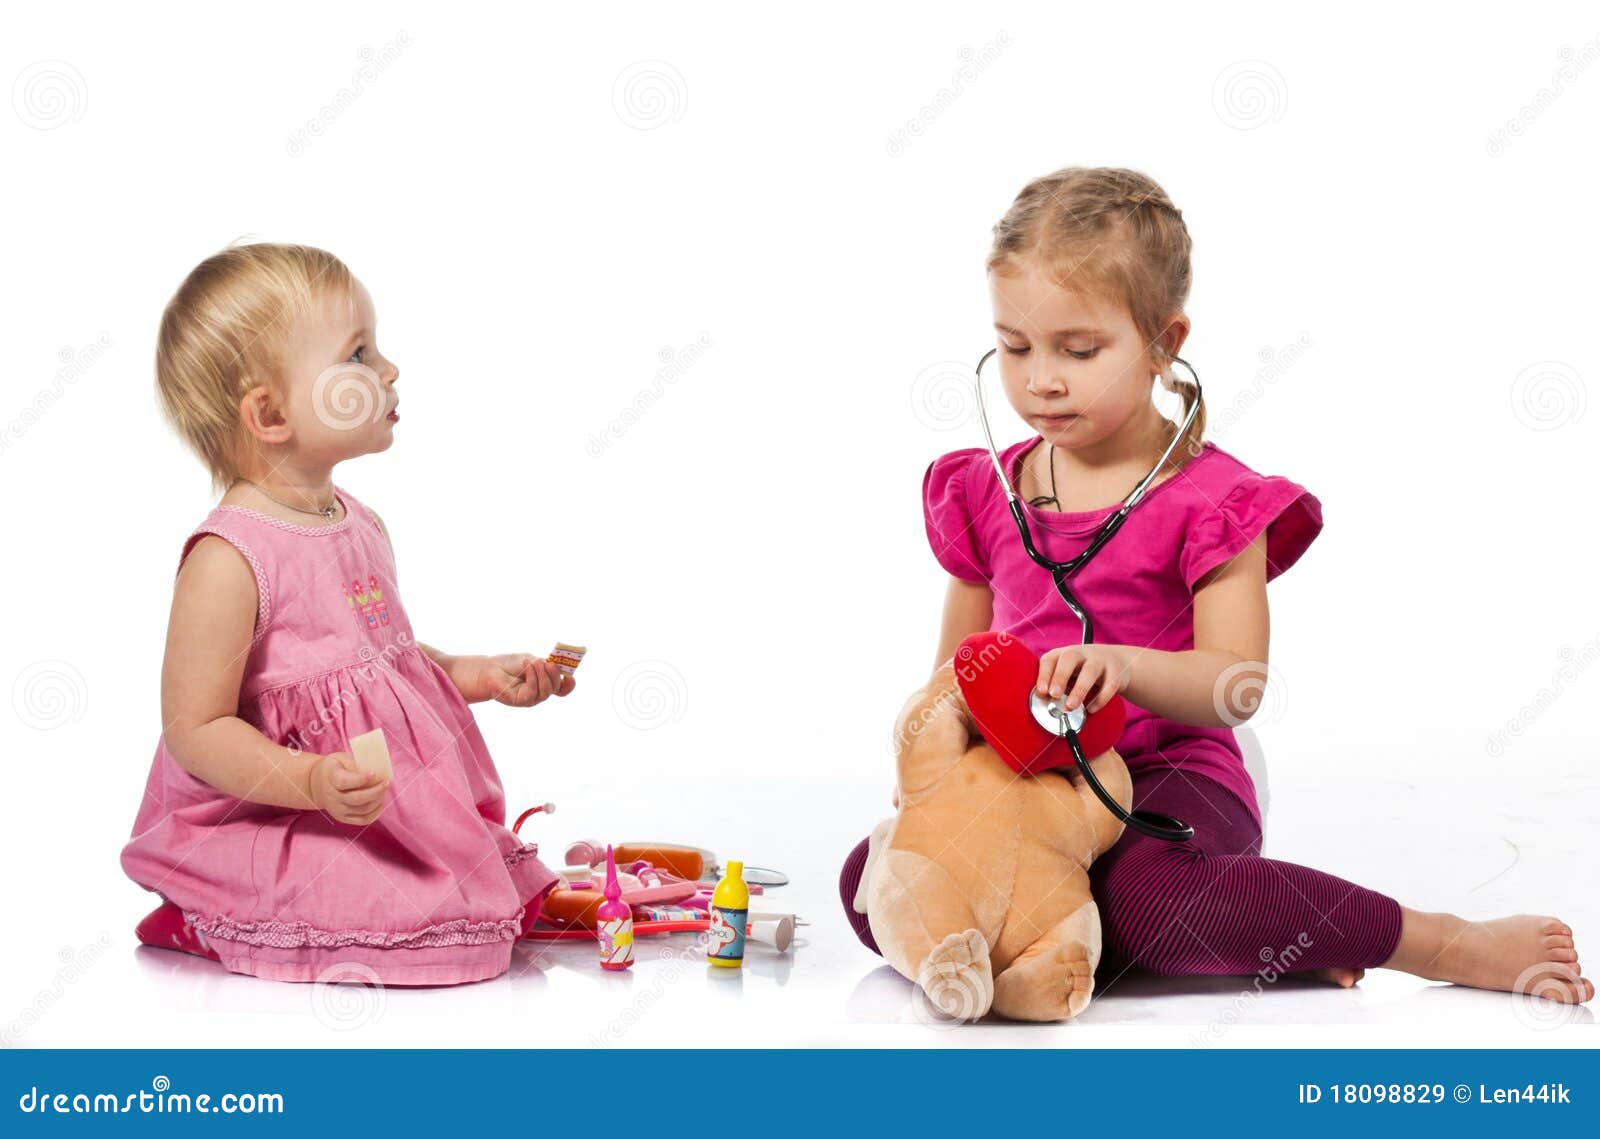 Child Playing Doctor With Doll Toy Stock Photo - Image ...